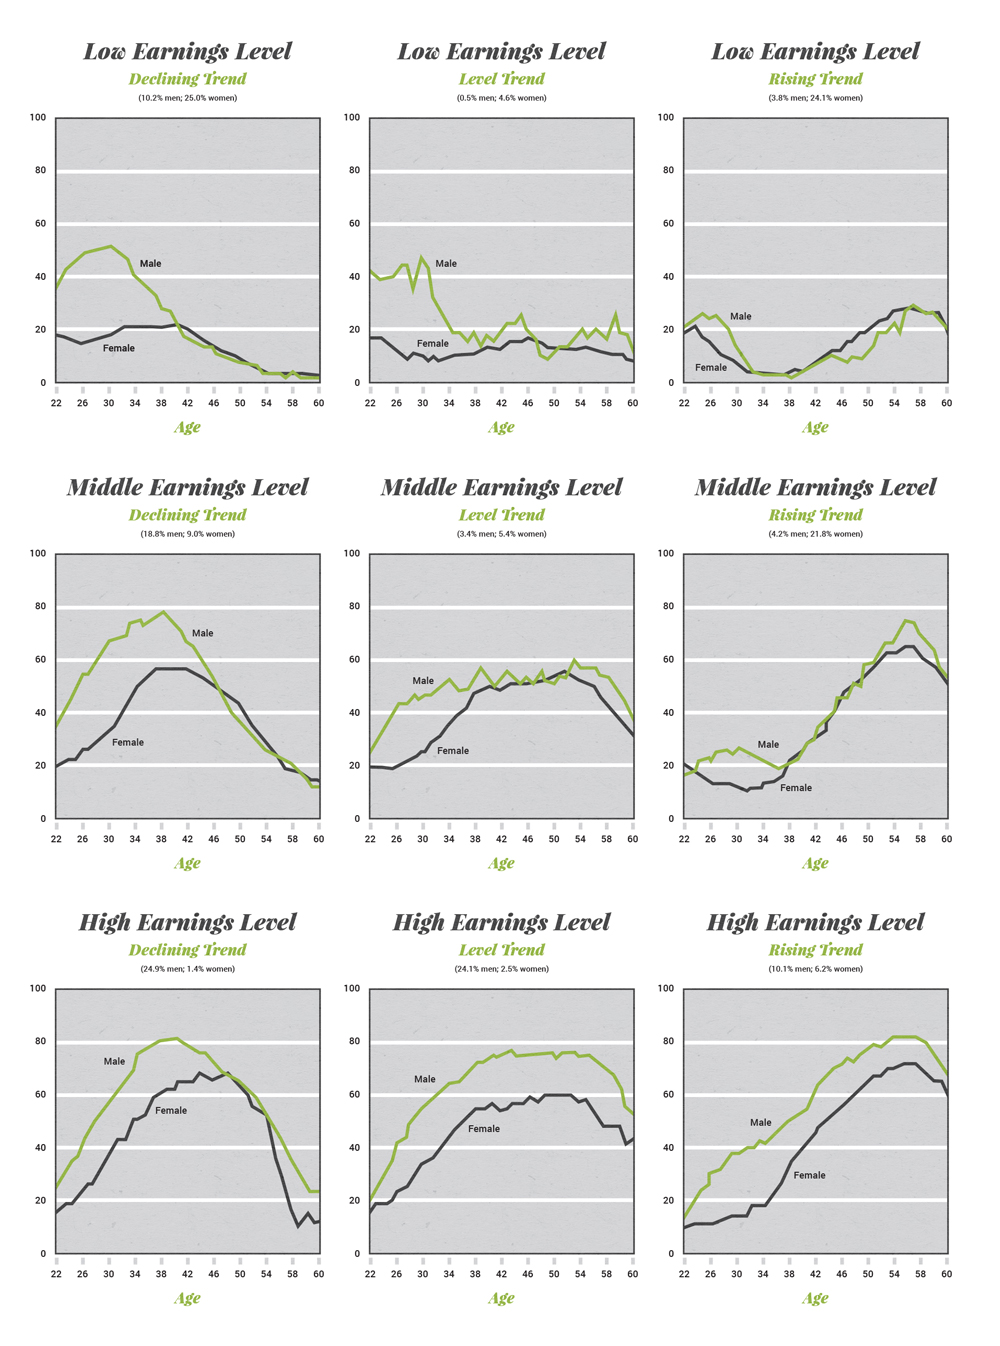 line graphs showing declining, level, and rising trends for low, medium, and high earning levels